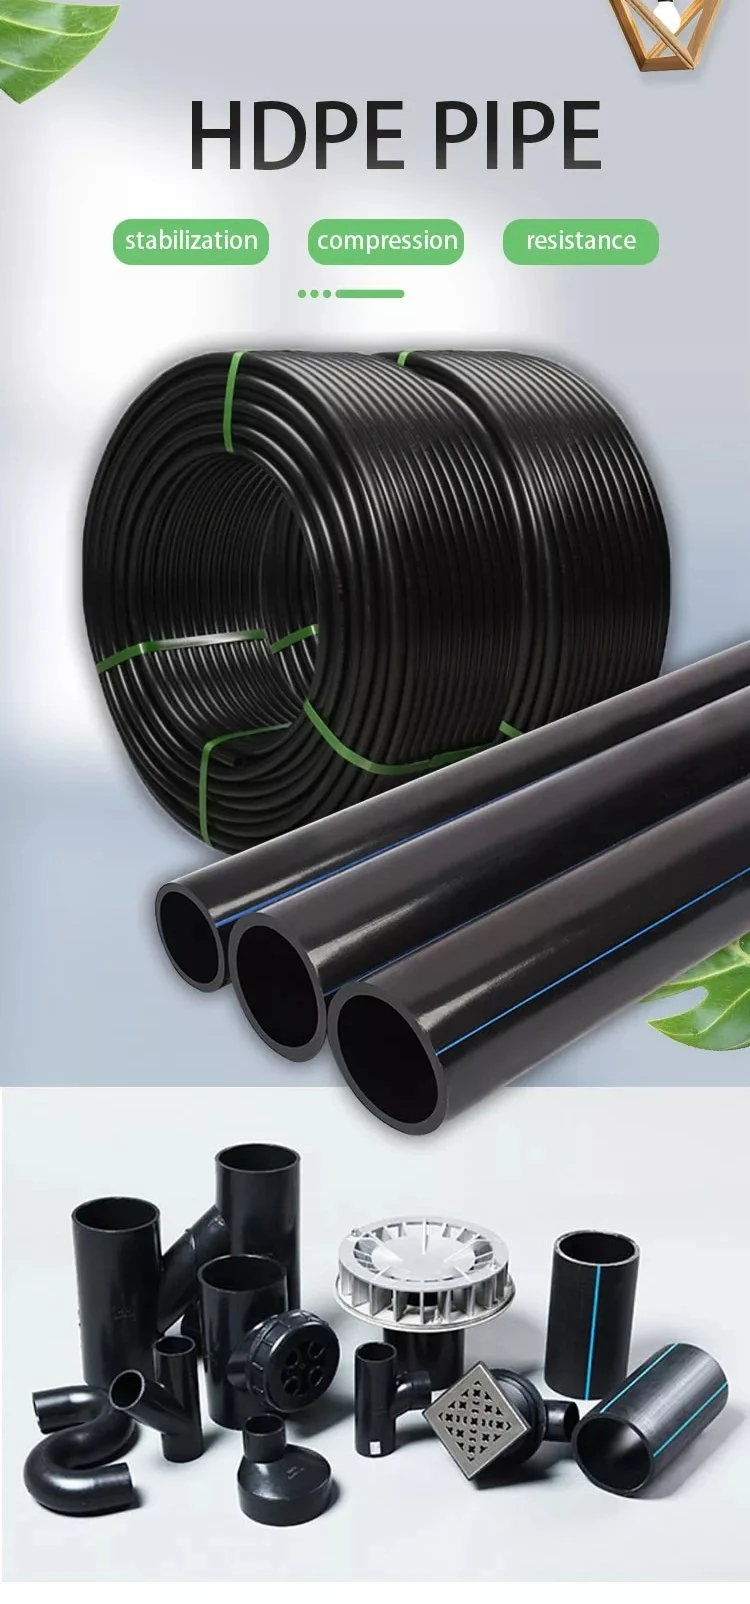 China PPR PVC HDPE Plastic Casing Irrigation High Pressure Pipes for Hot& Cold Water